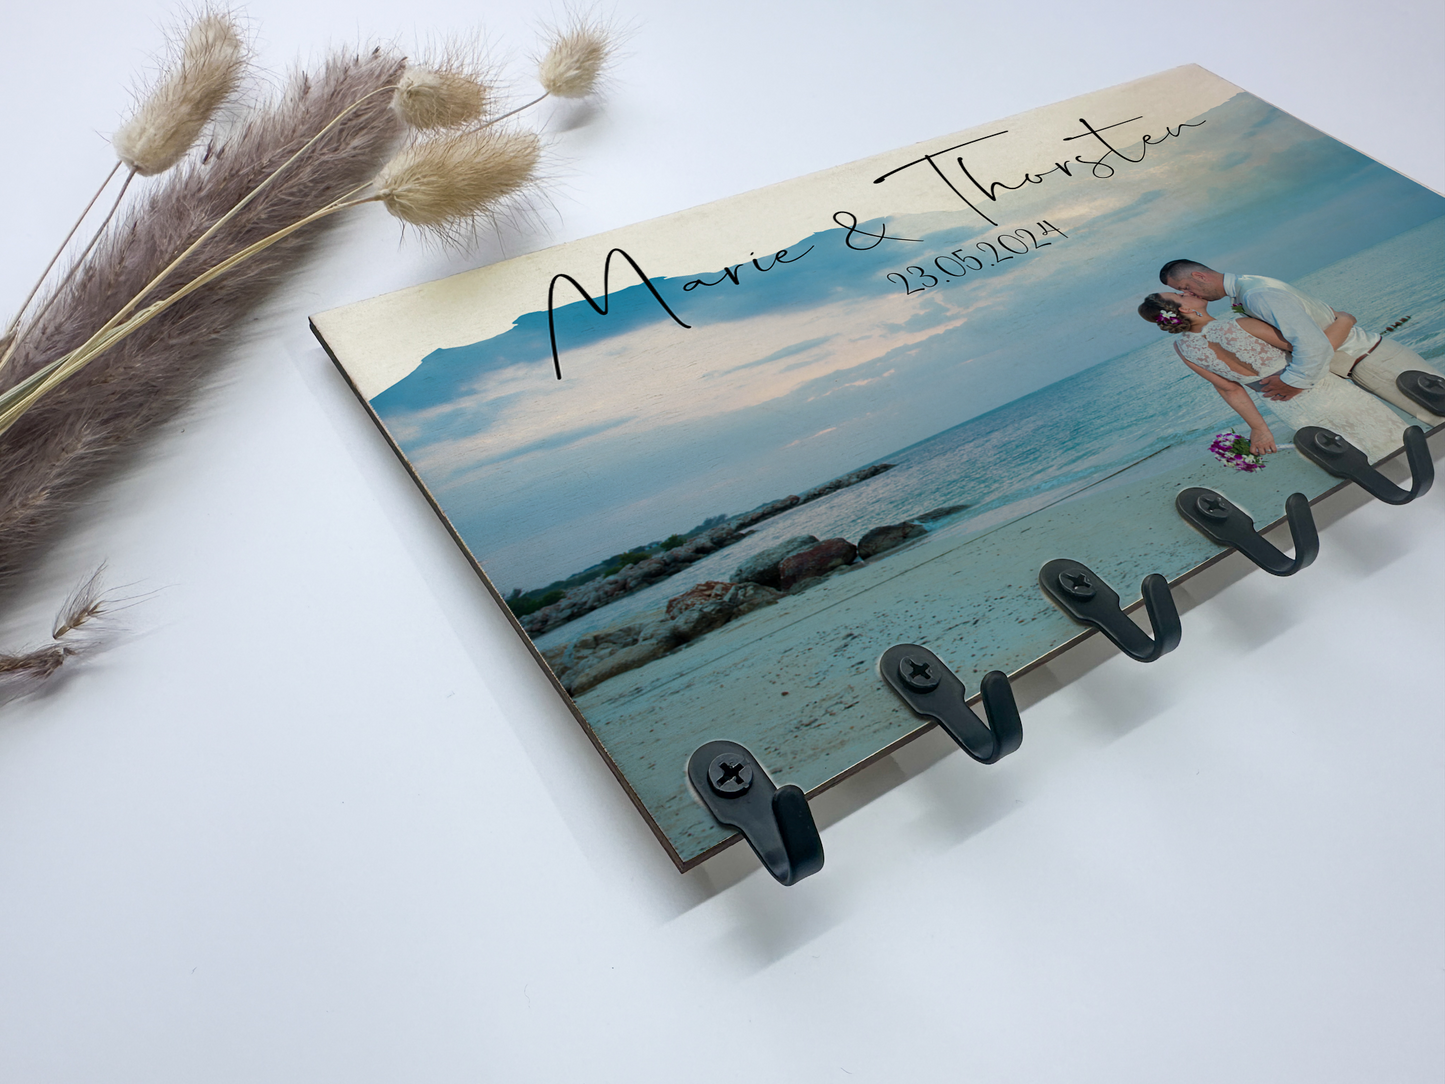 Photo key rack personalized with your photo &amp; desired text/key rack made of wood/housewarming gift idea/wedding gift idea/topping out ceremony gift